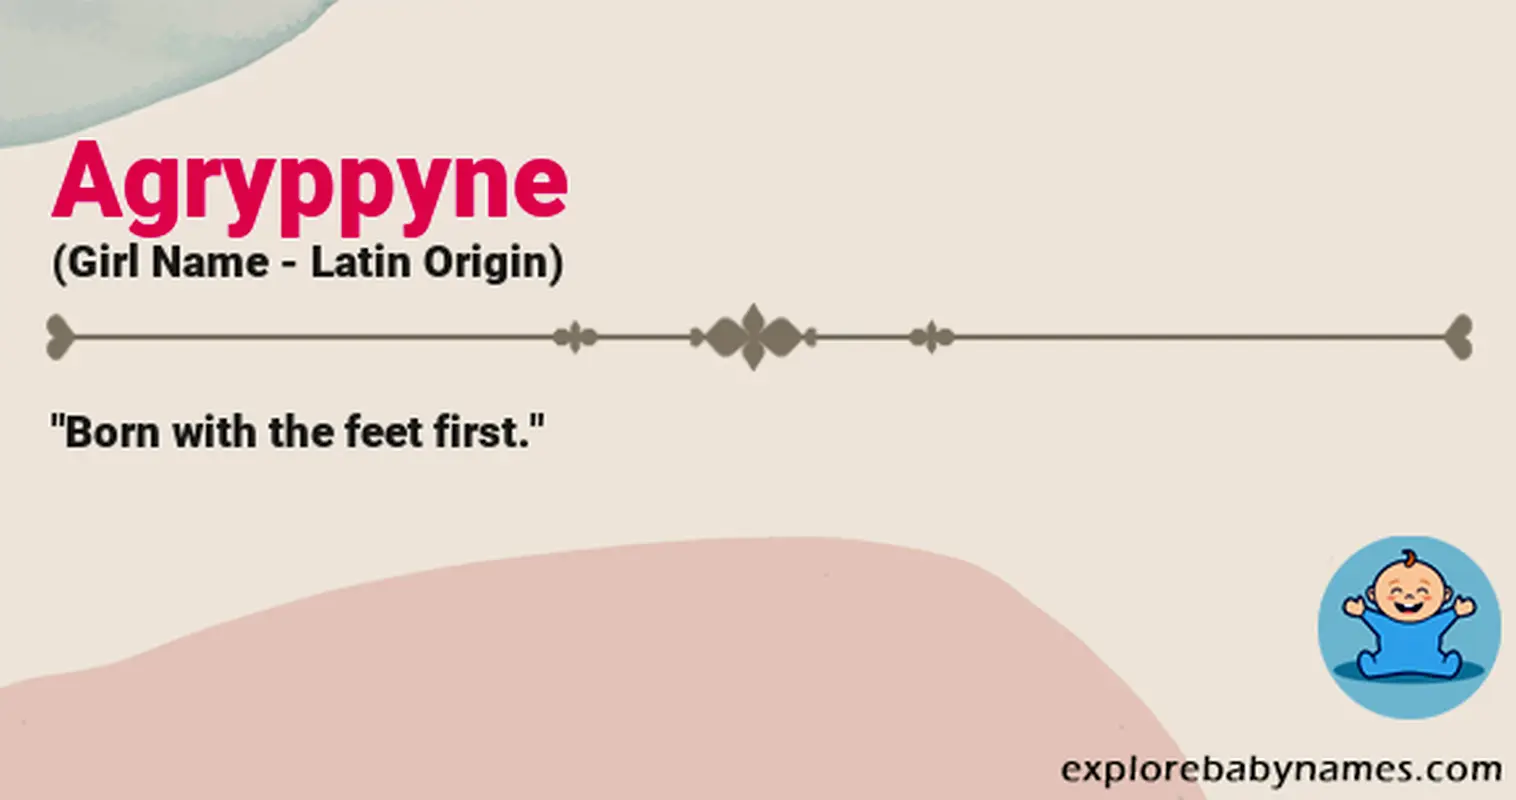 Meaning of Agryppyne